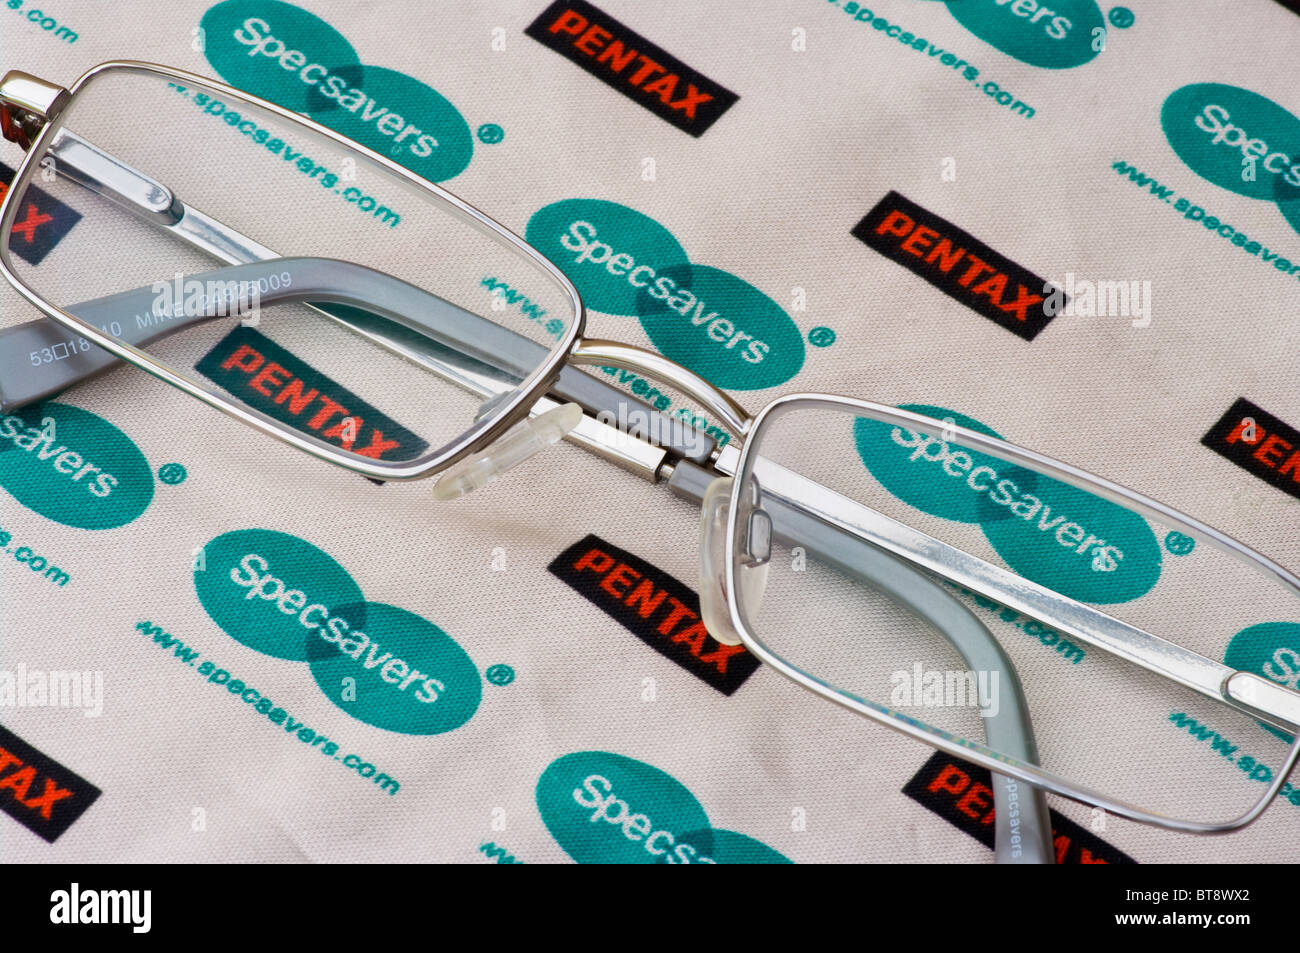 Pair Of Spectacles On A Specsavers Lens Cloth Stock Photo